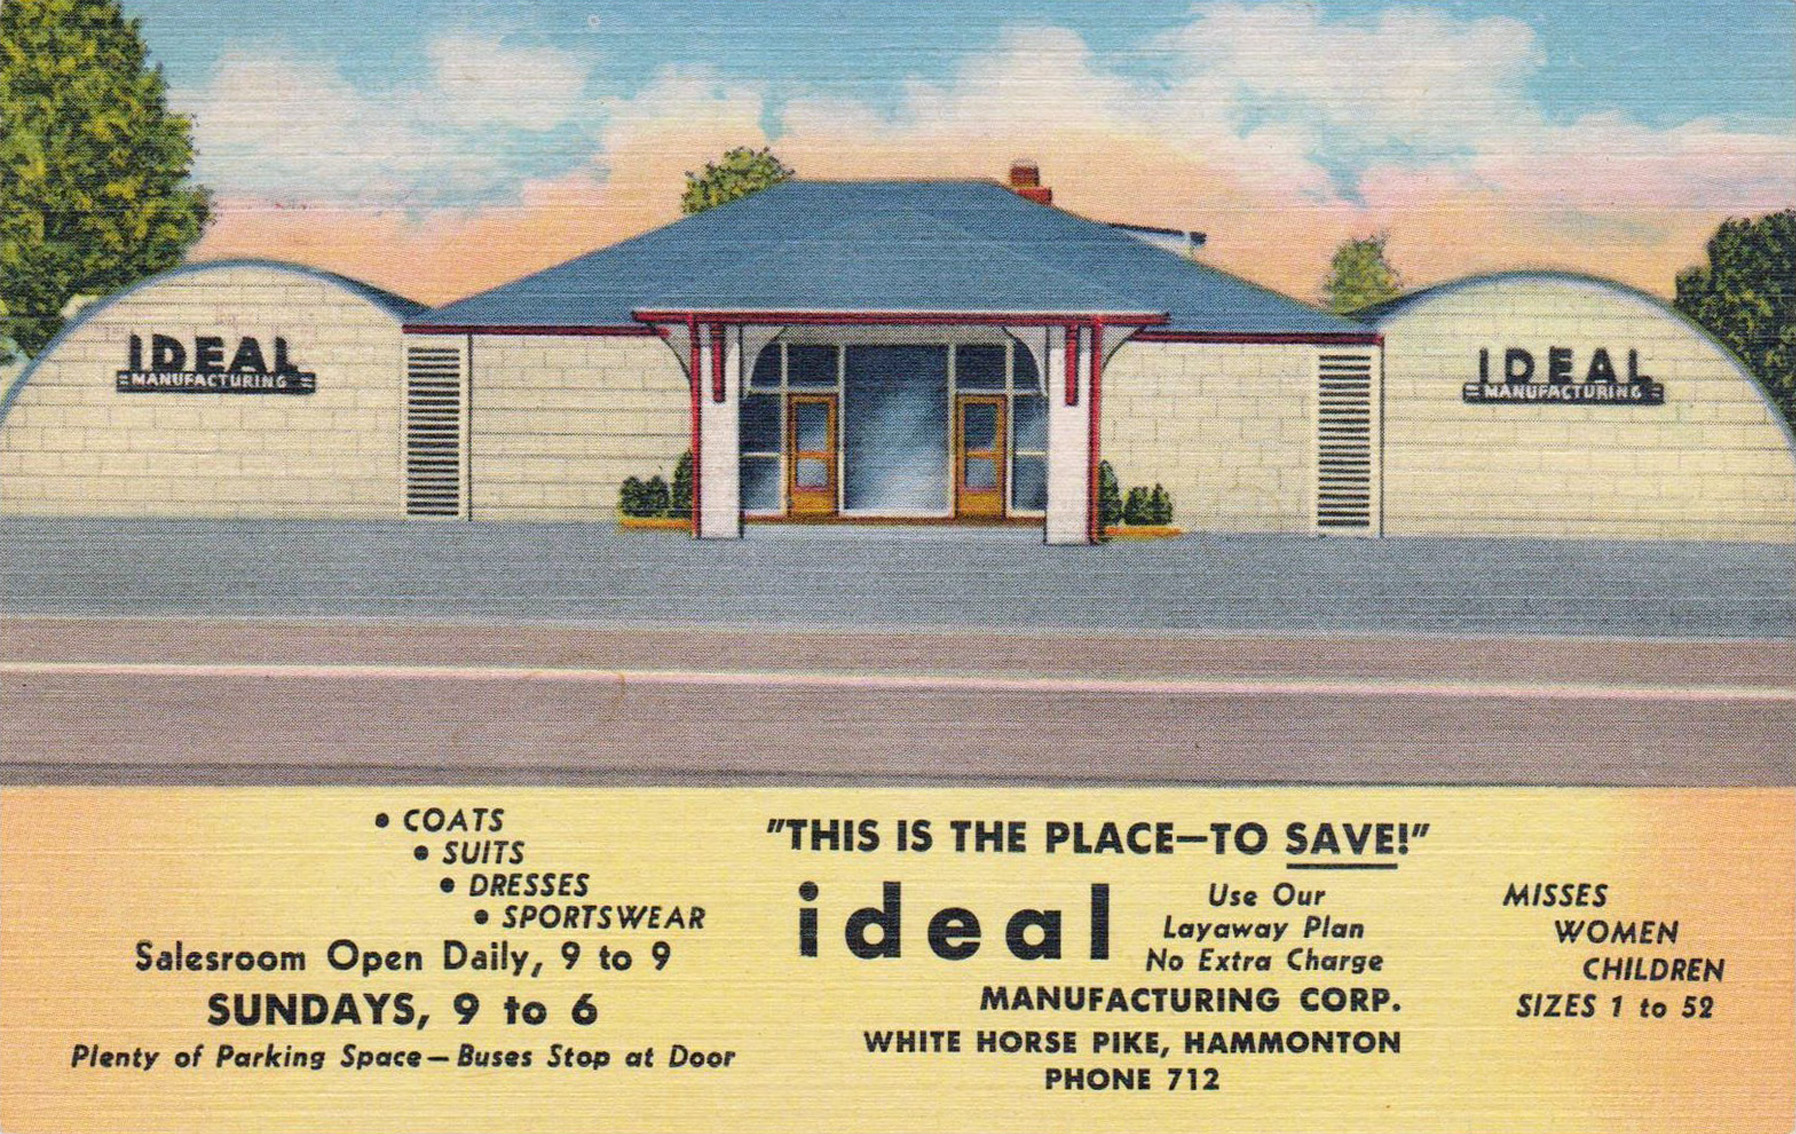 Hammonton - Ideal retail and manufacturing outlet on Rt 30-White Horse Pike